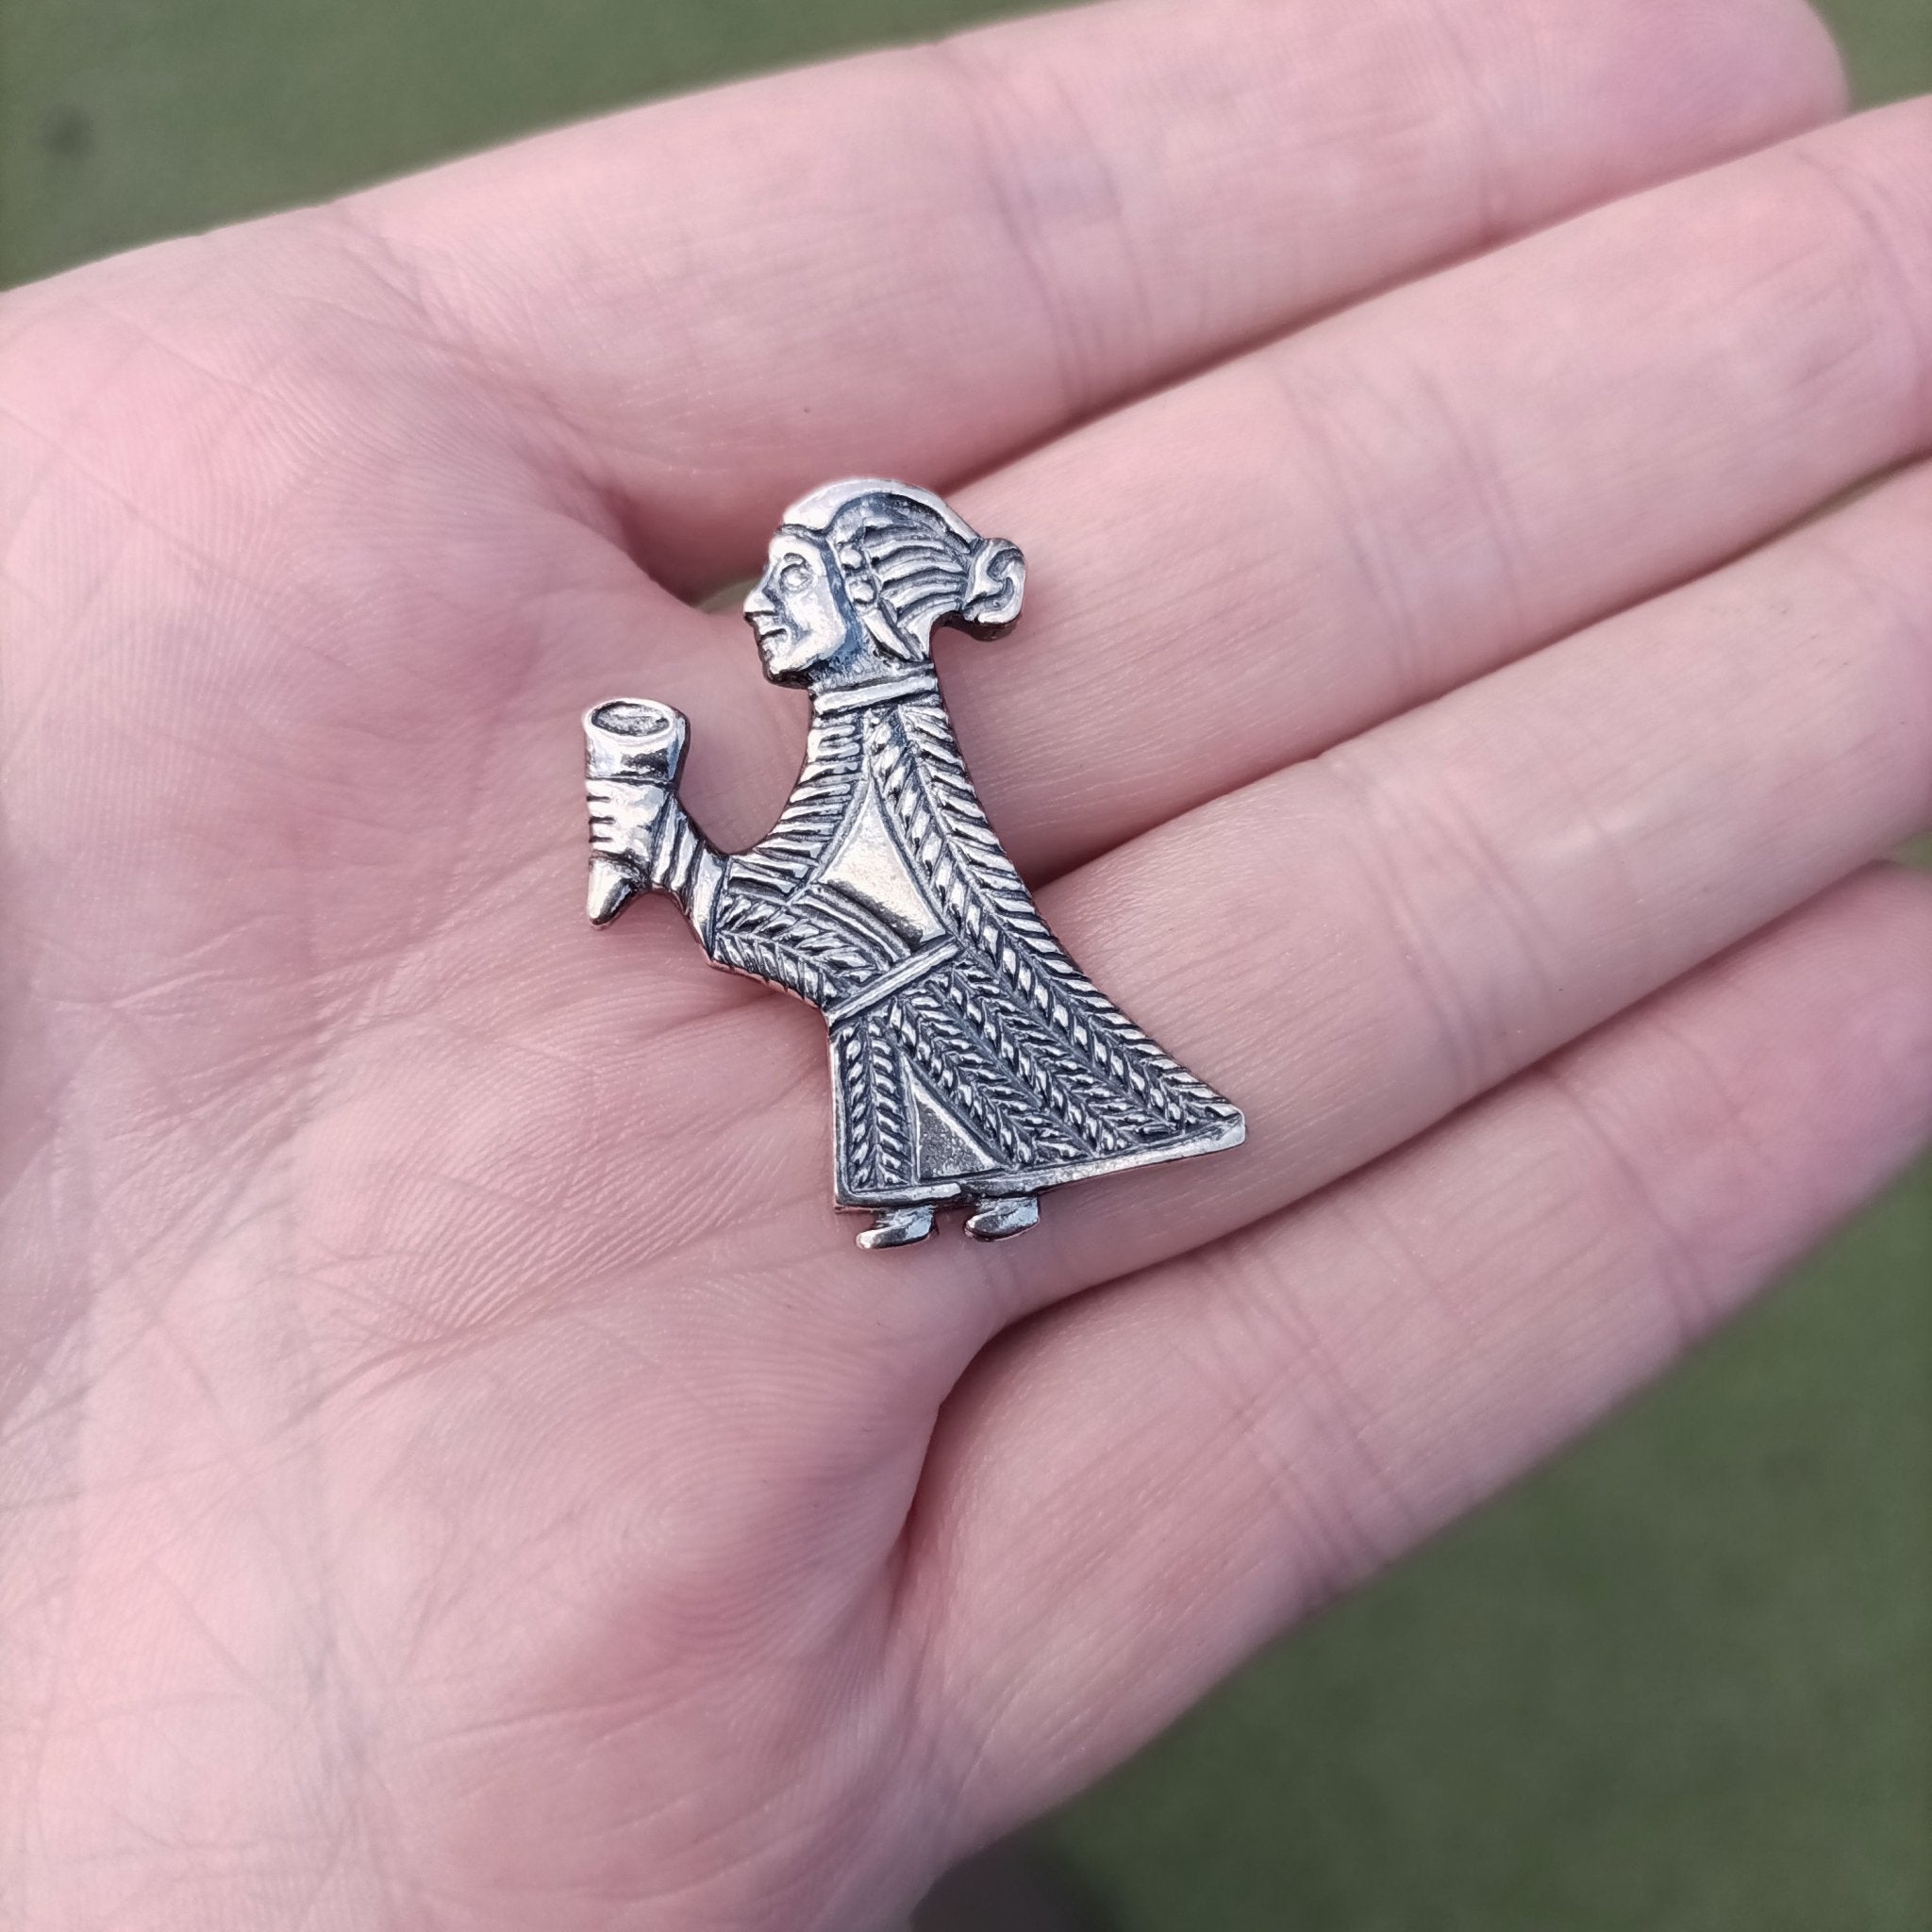 Silver Valkyrie Pendant on Hand